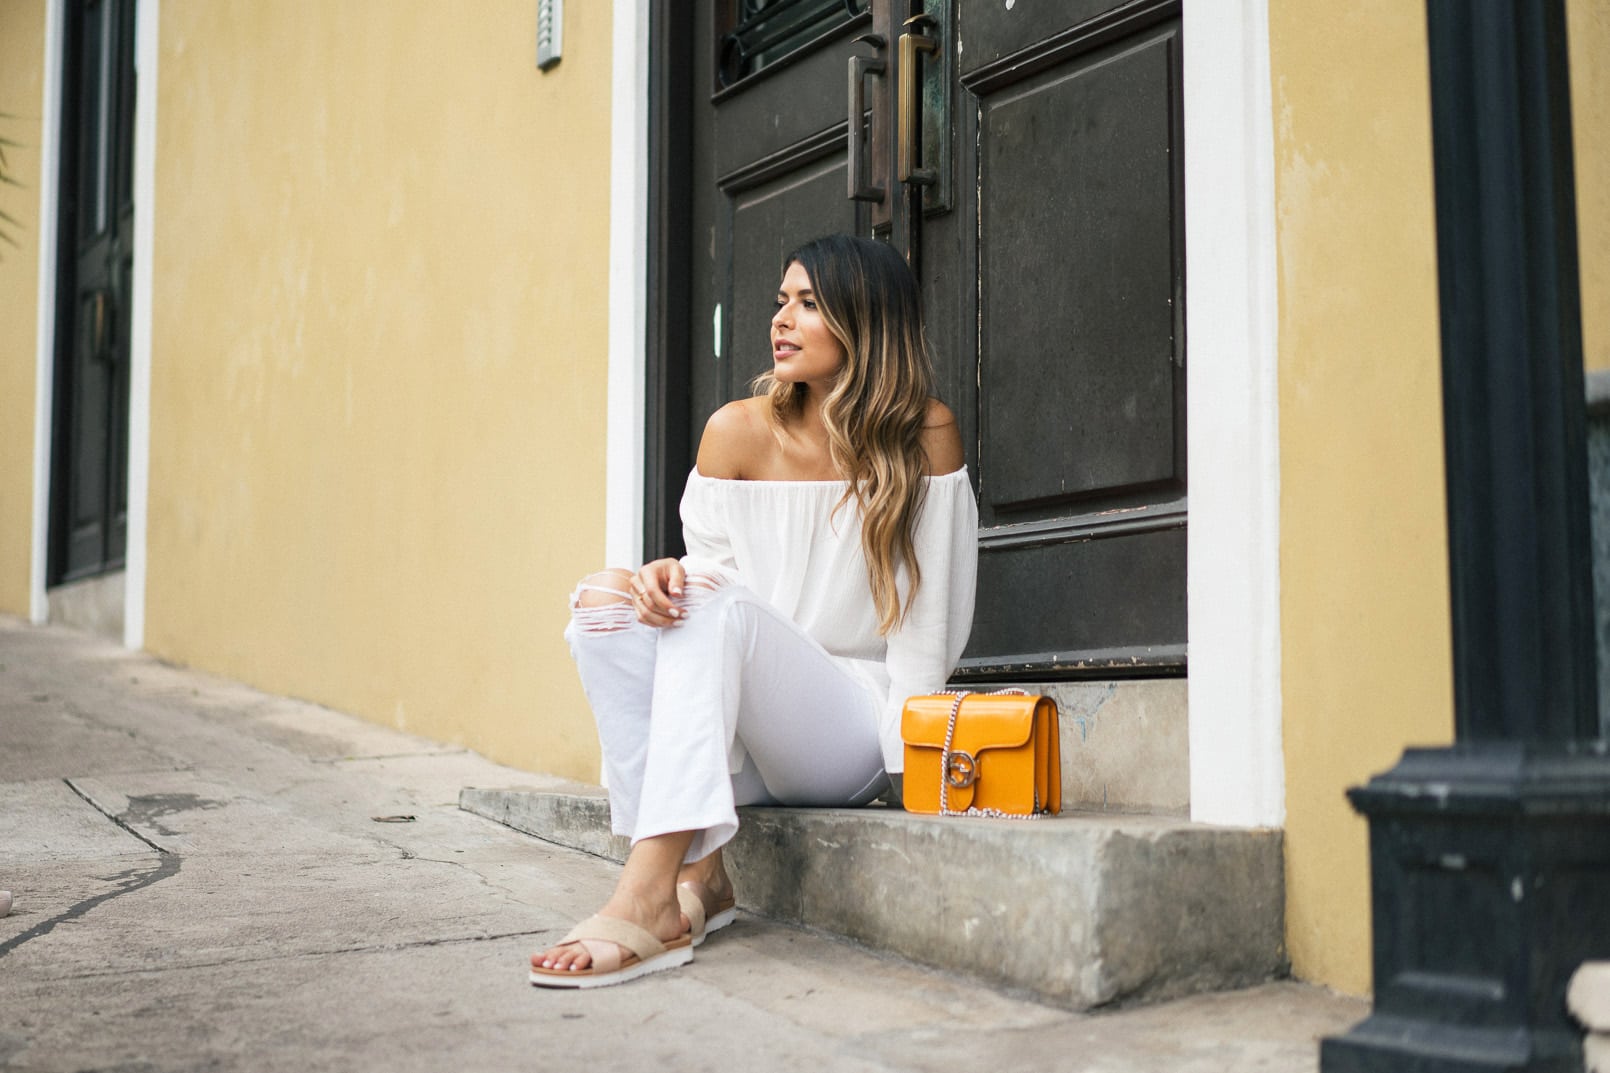 How to dress up sandals - UGG Australia Sandals, 7 FAM White flared cropped jeans, white off the shoulder top